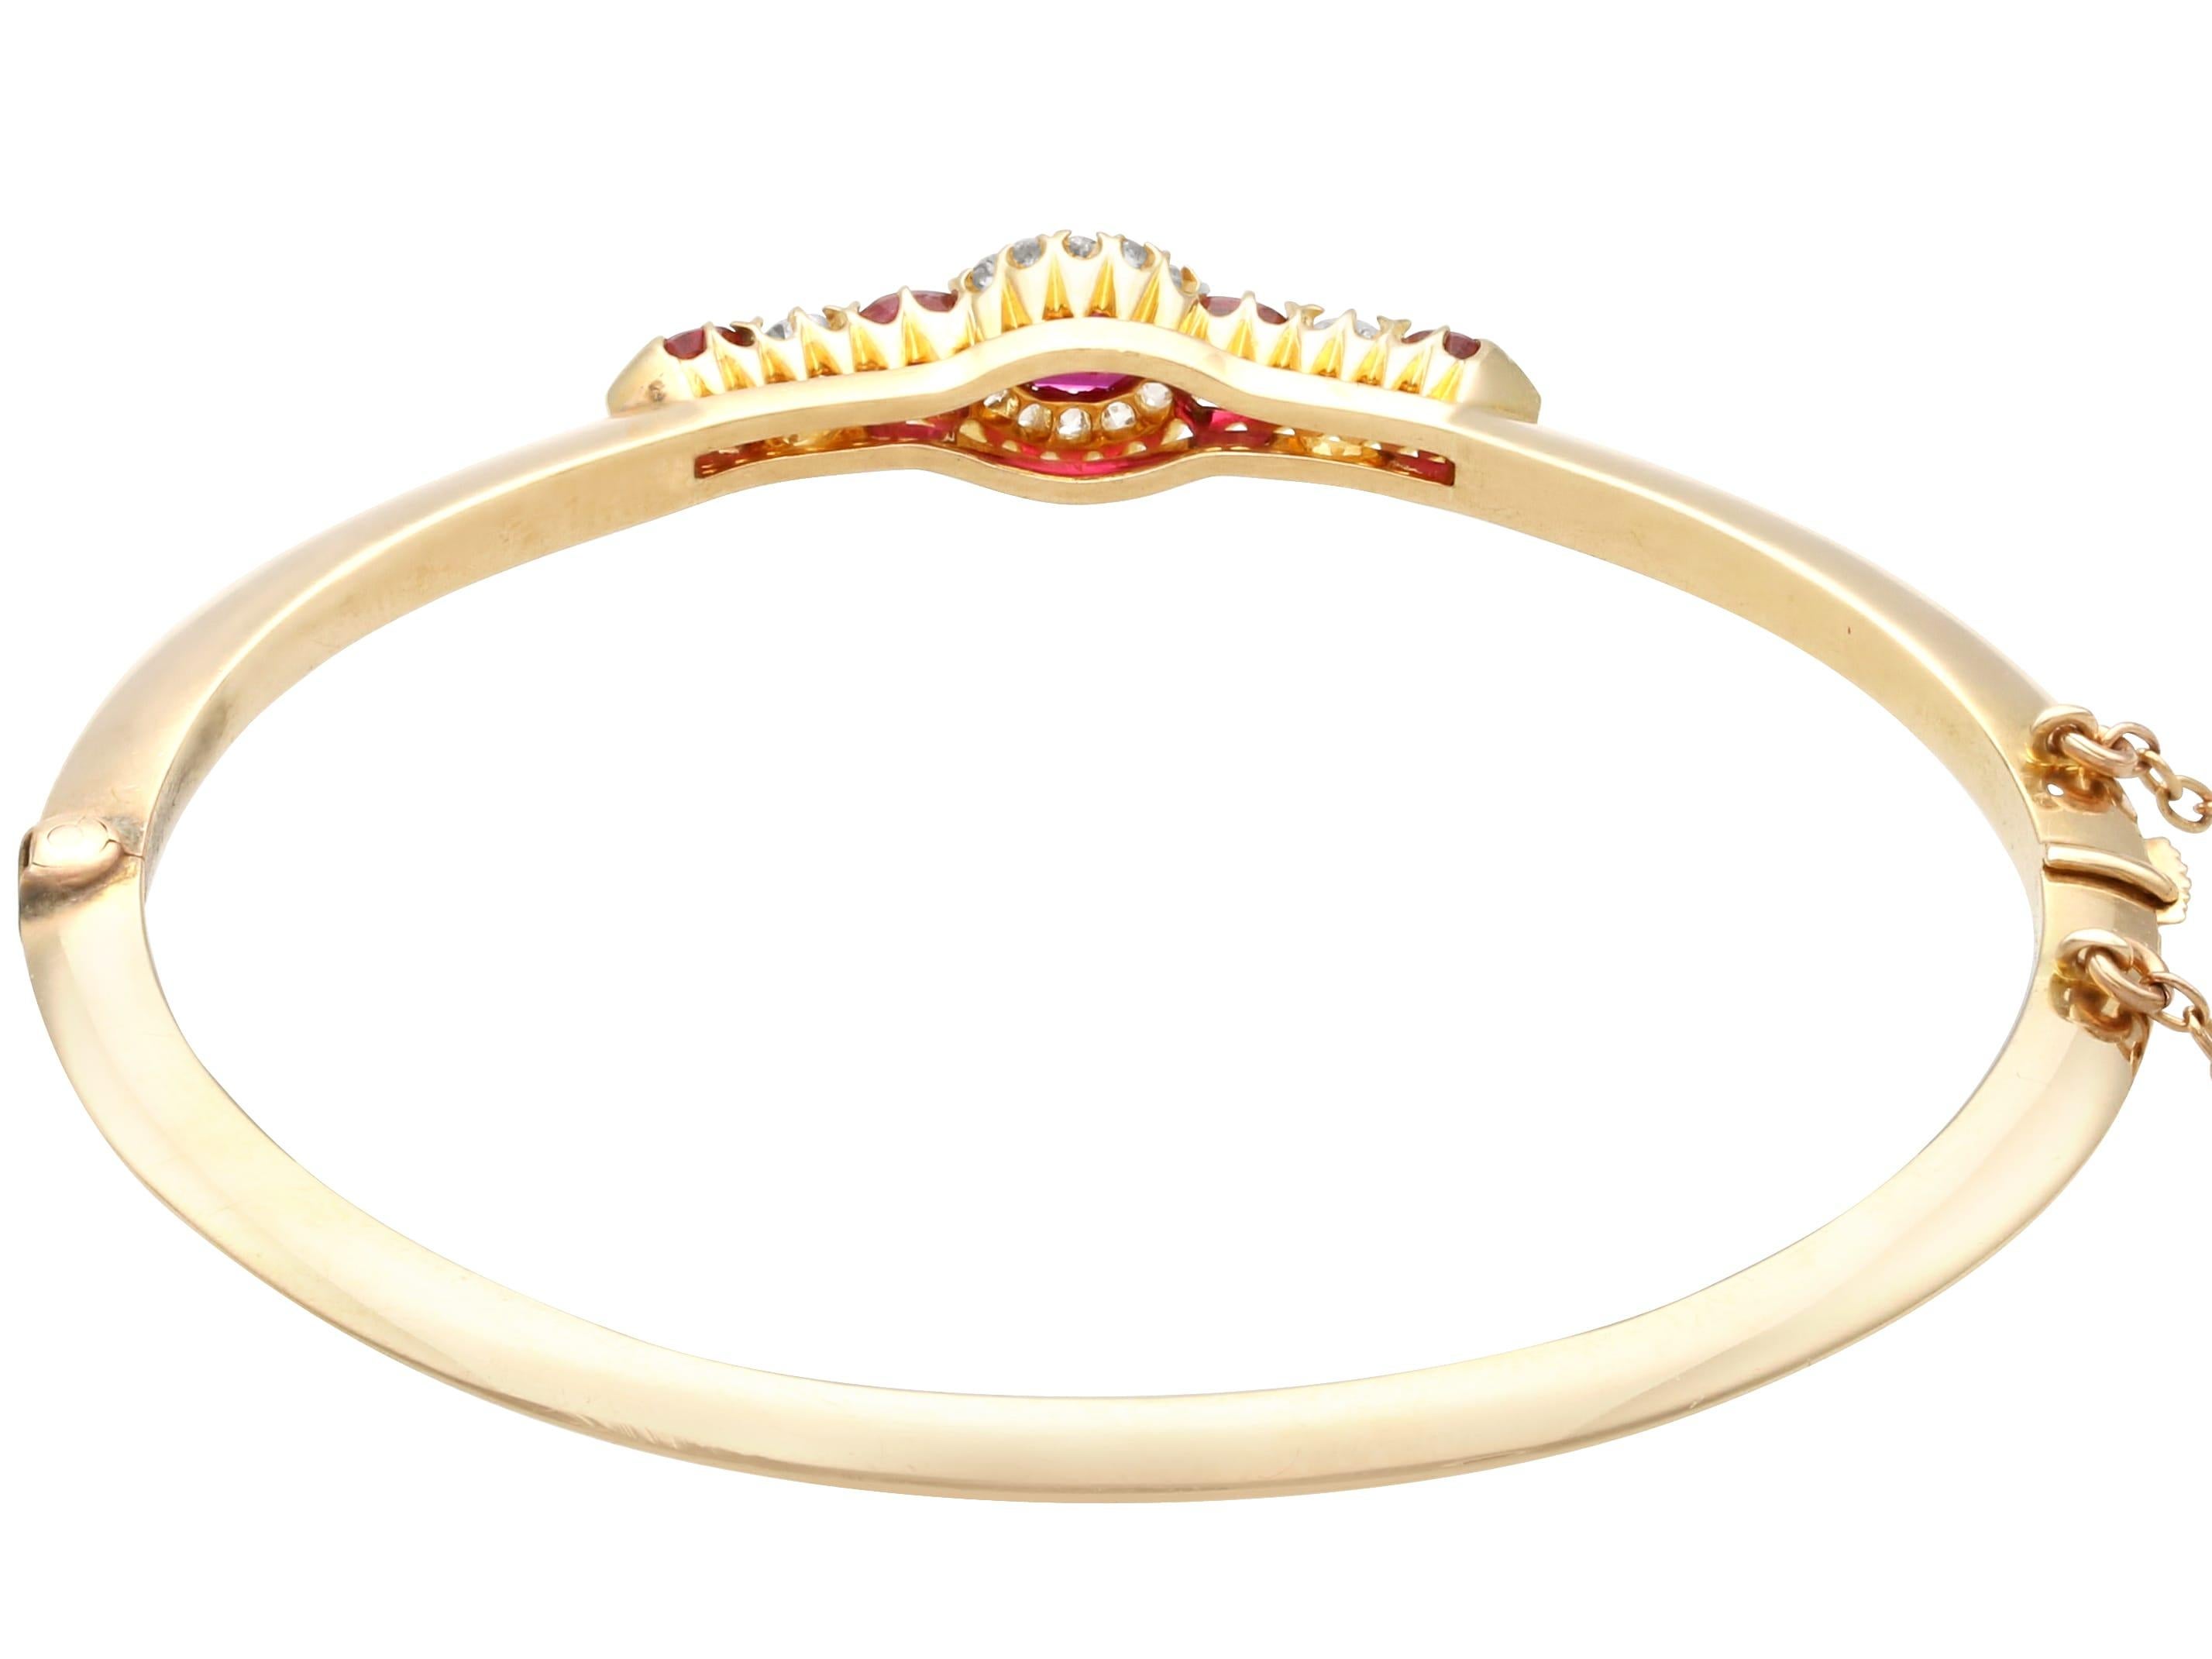 Victorian 1.95 Carat Ruby and 0.40 Carat Diamond 15k Yellow Gold Bangle In Excellent Condition For Sale In Jesmond, Newcastle Upon Tyne